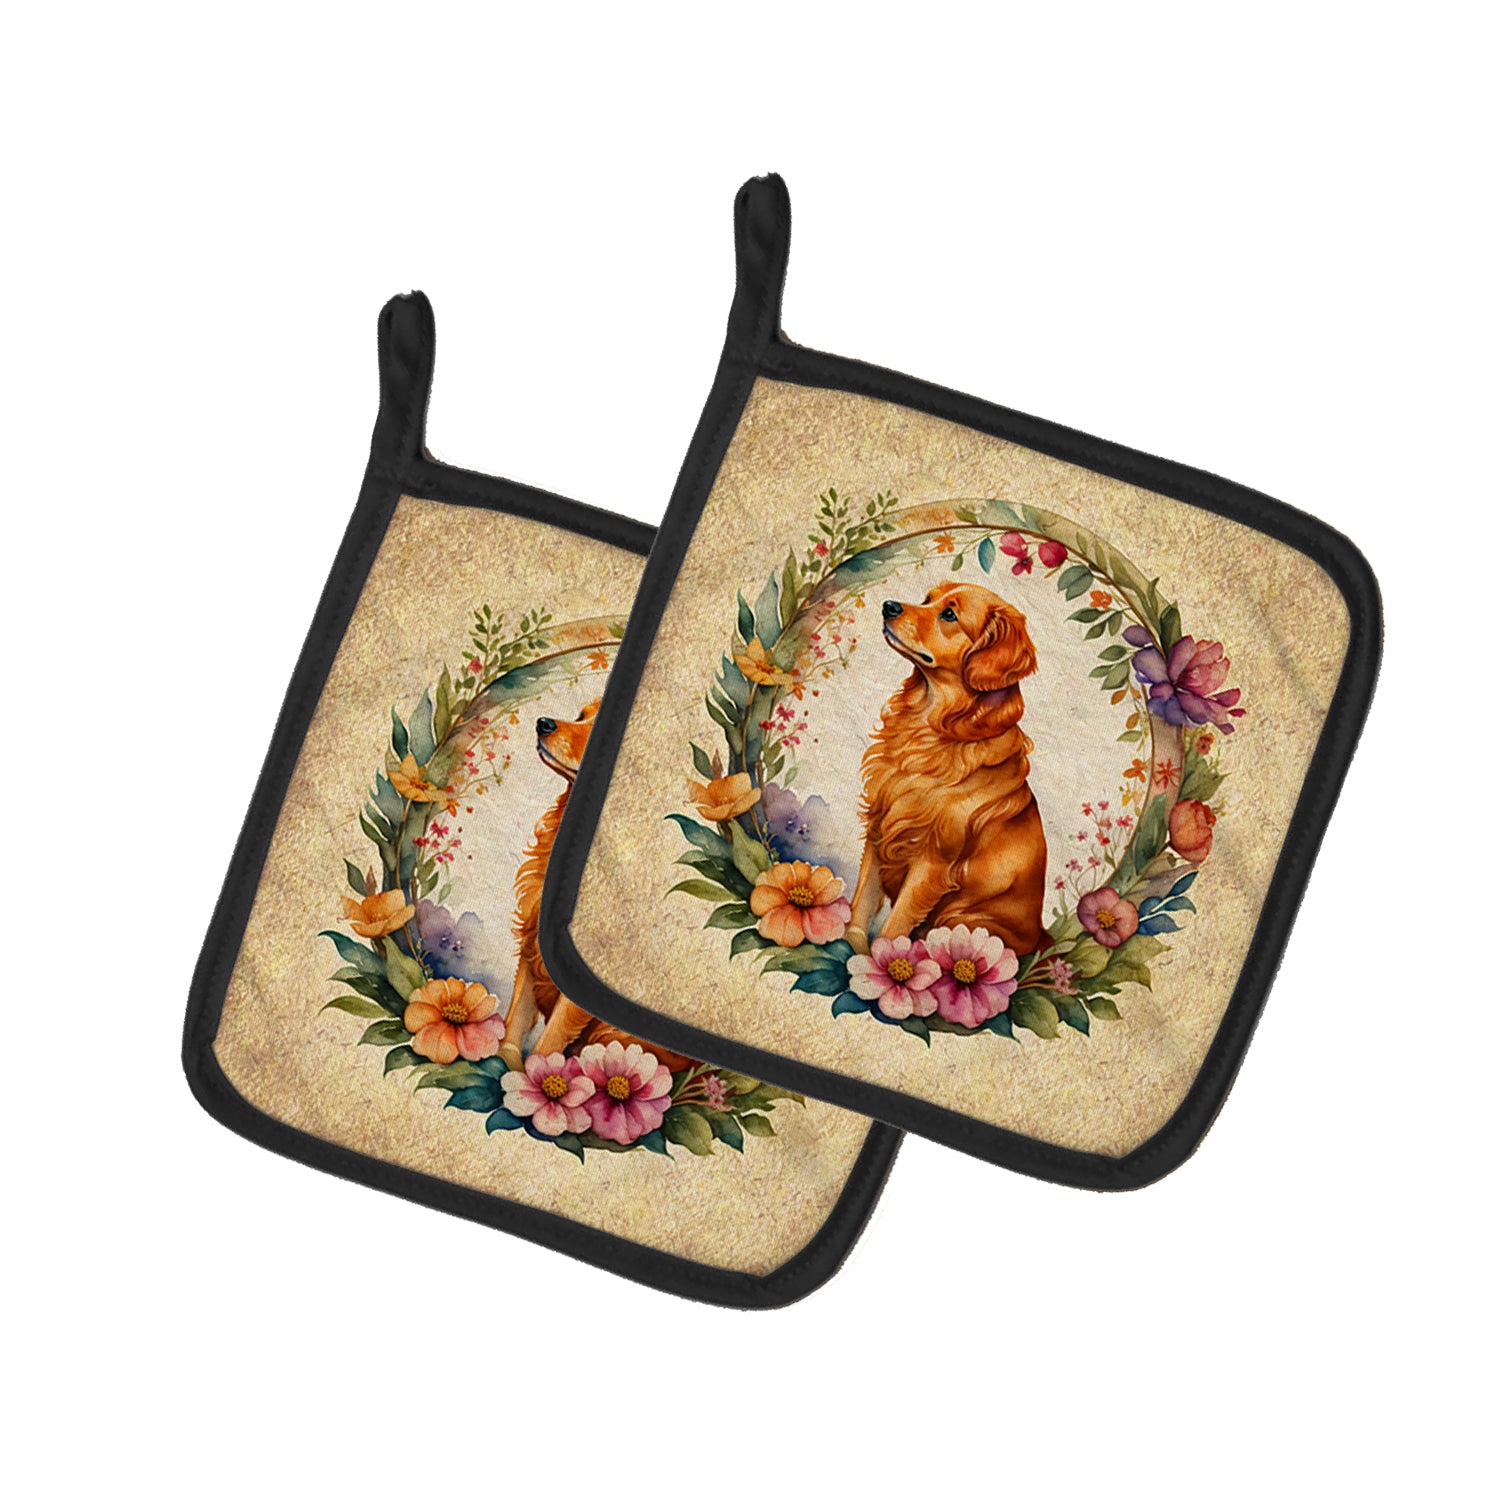 Buy this Nova Scotia Duck Tolling Retriever and Flowers Pair of Pot Holders